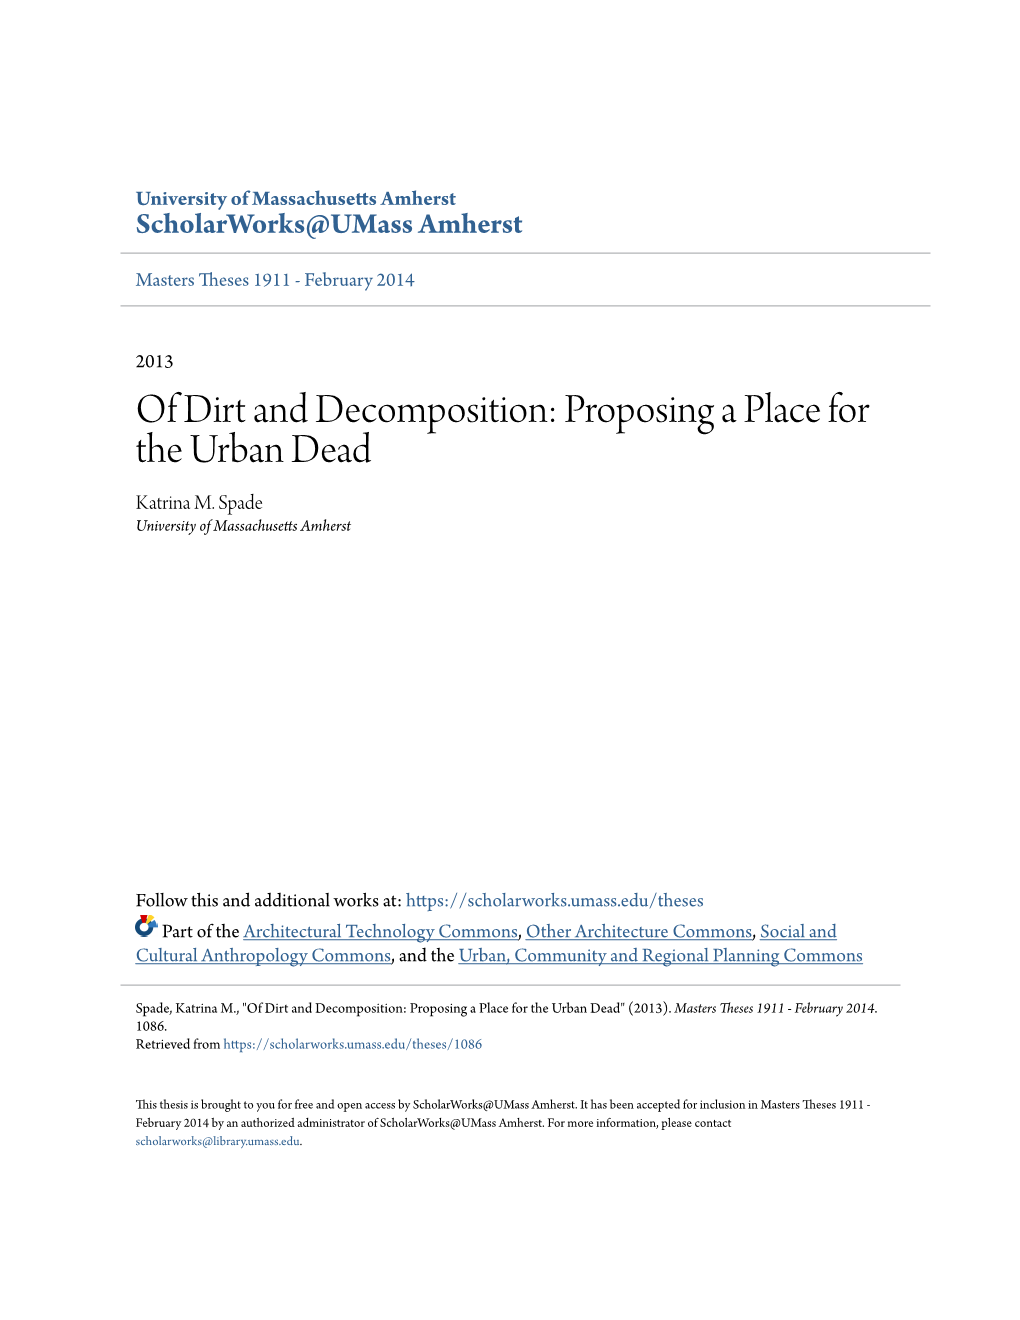 Of Dirt and Decomposition: Proposing a Place for the Urban Dead Katrina M